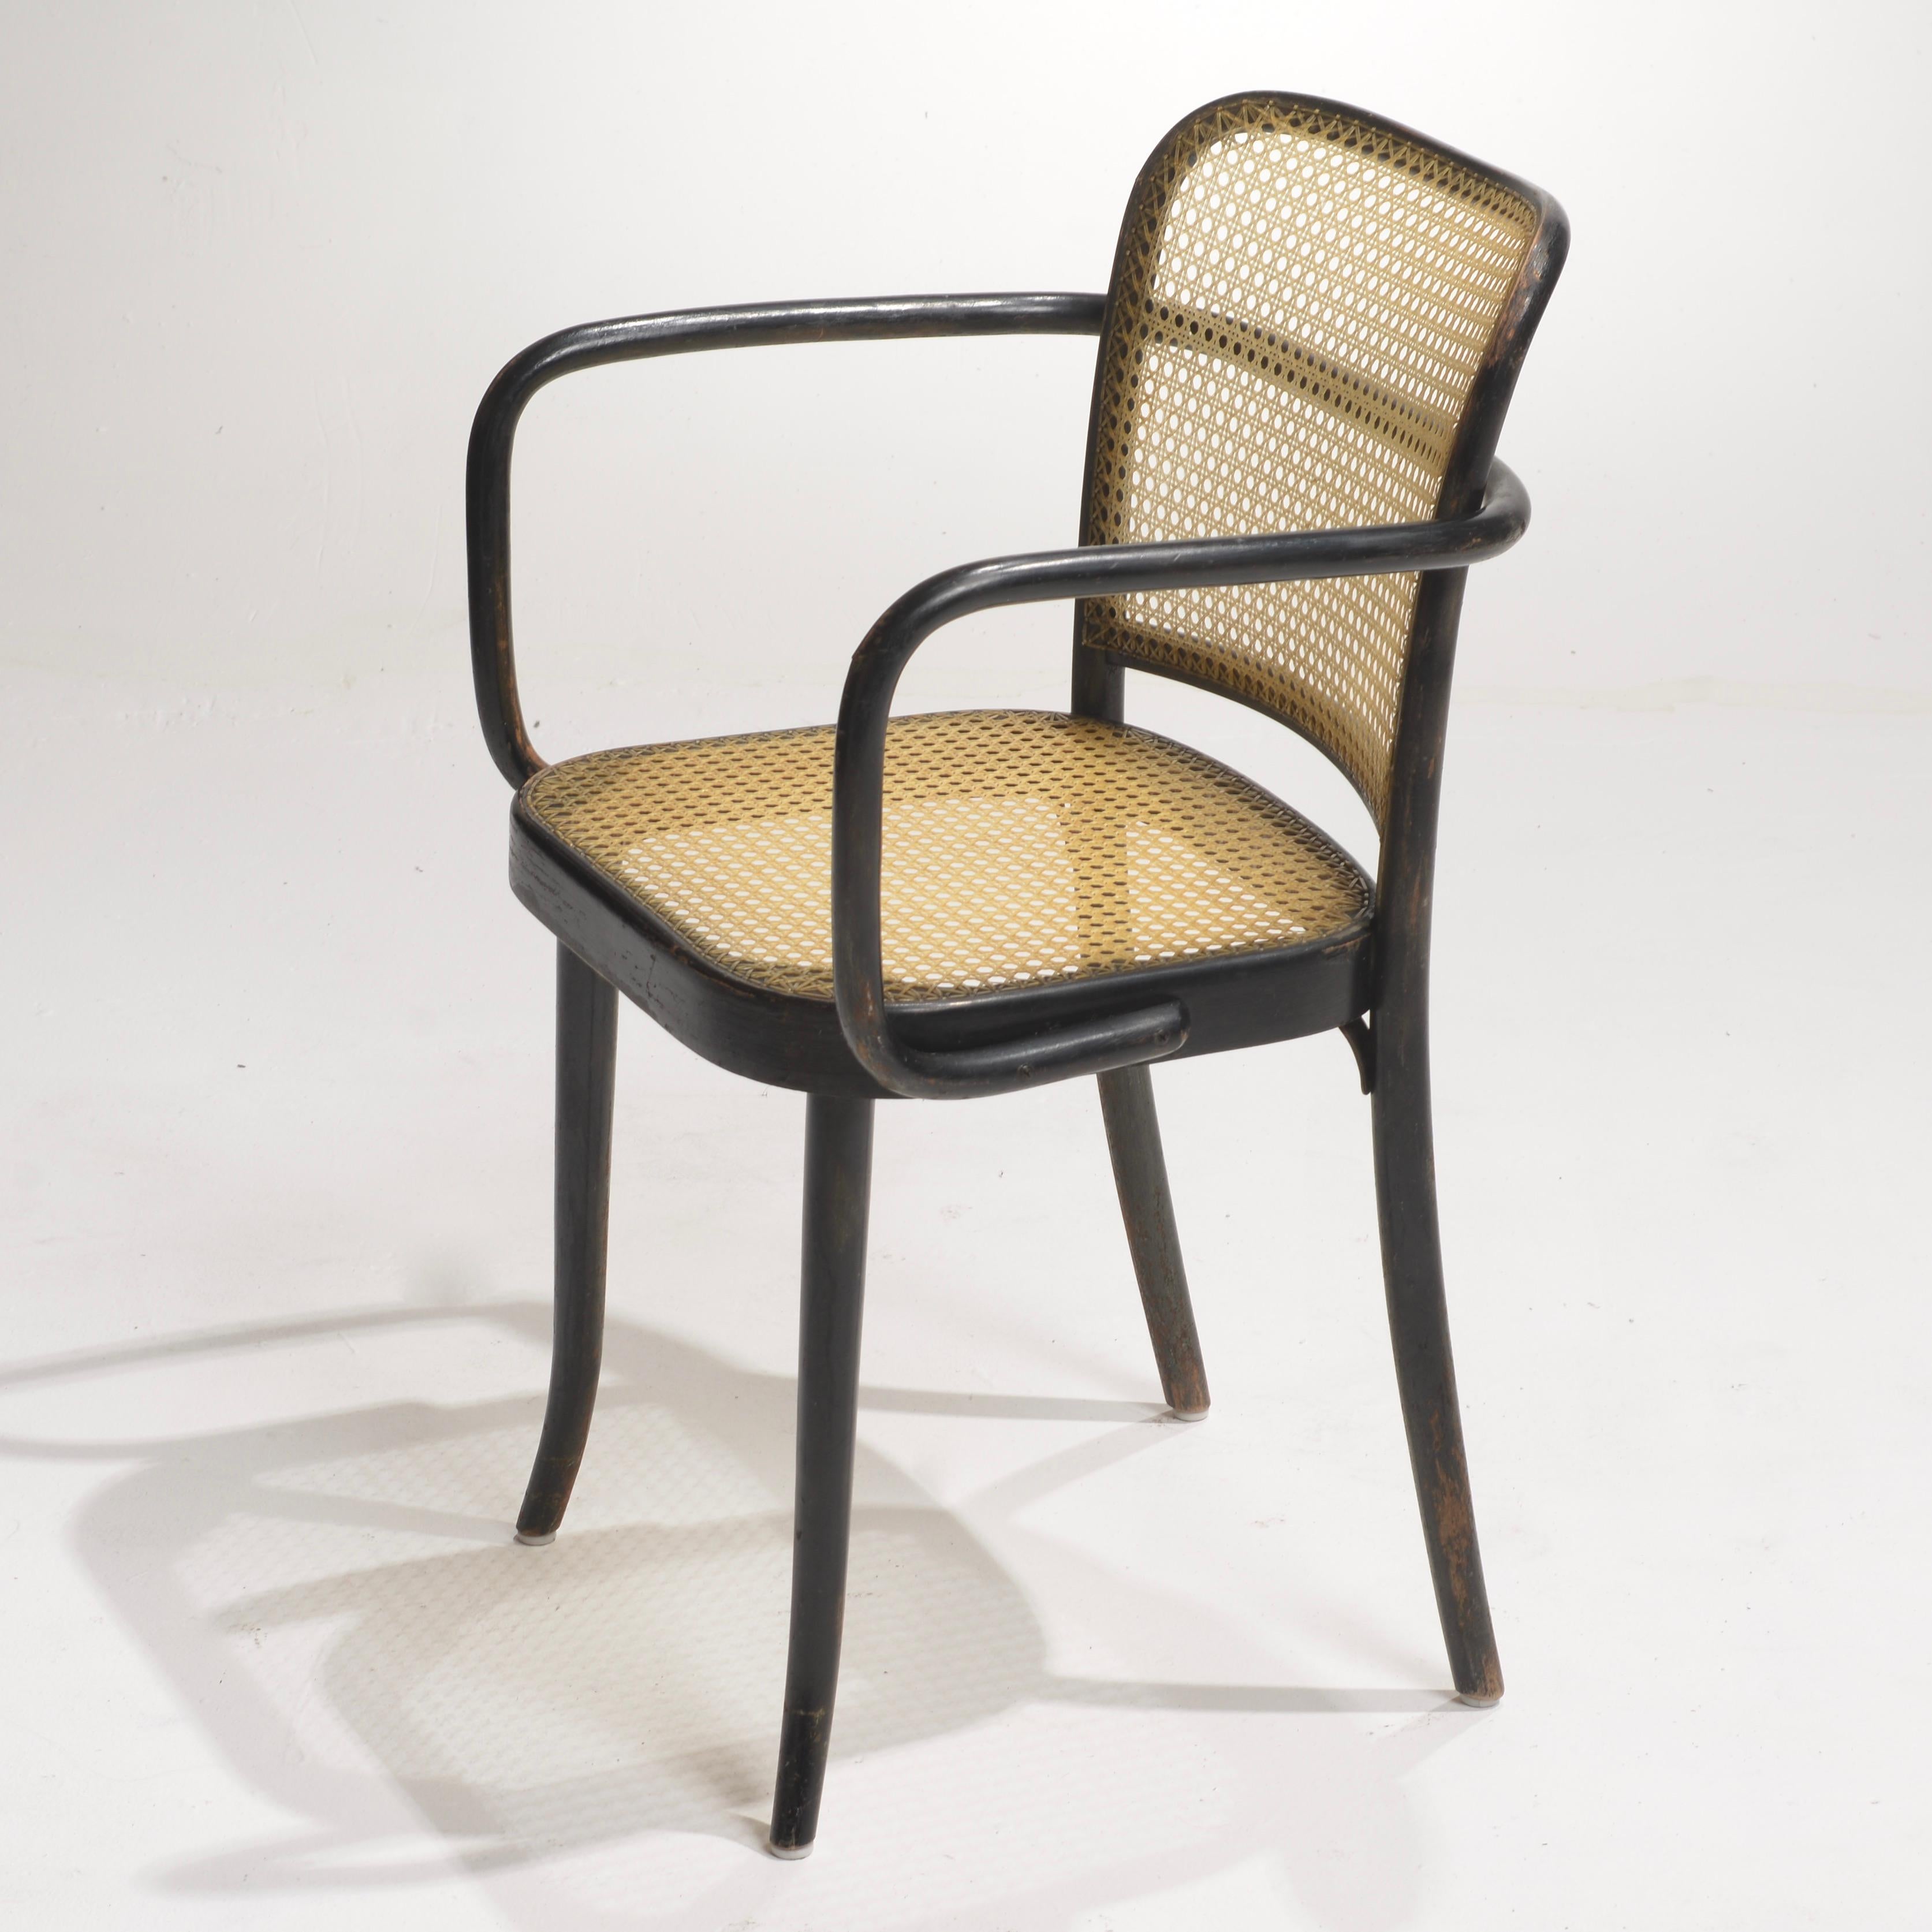 Josef Hoffmann Bentwood Beech Prague Model 811 Chairs in Black and Leather Weave For Sale 1